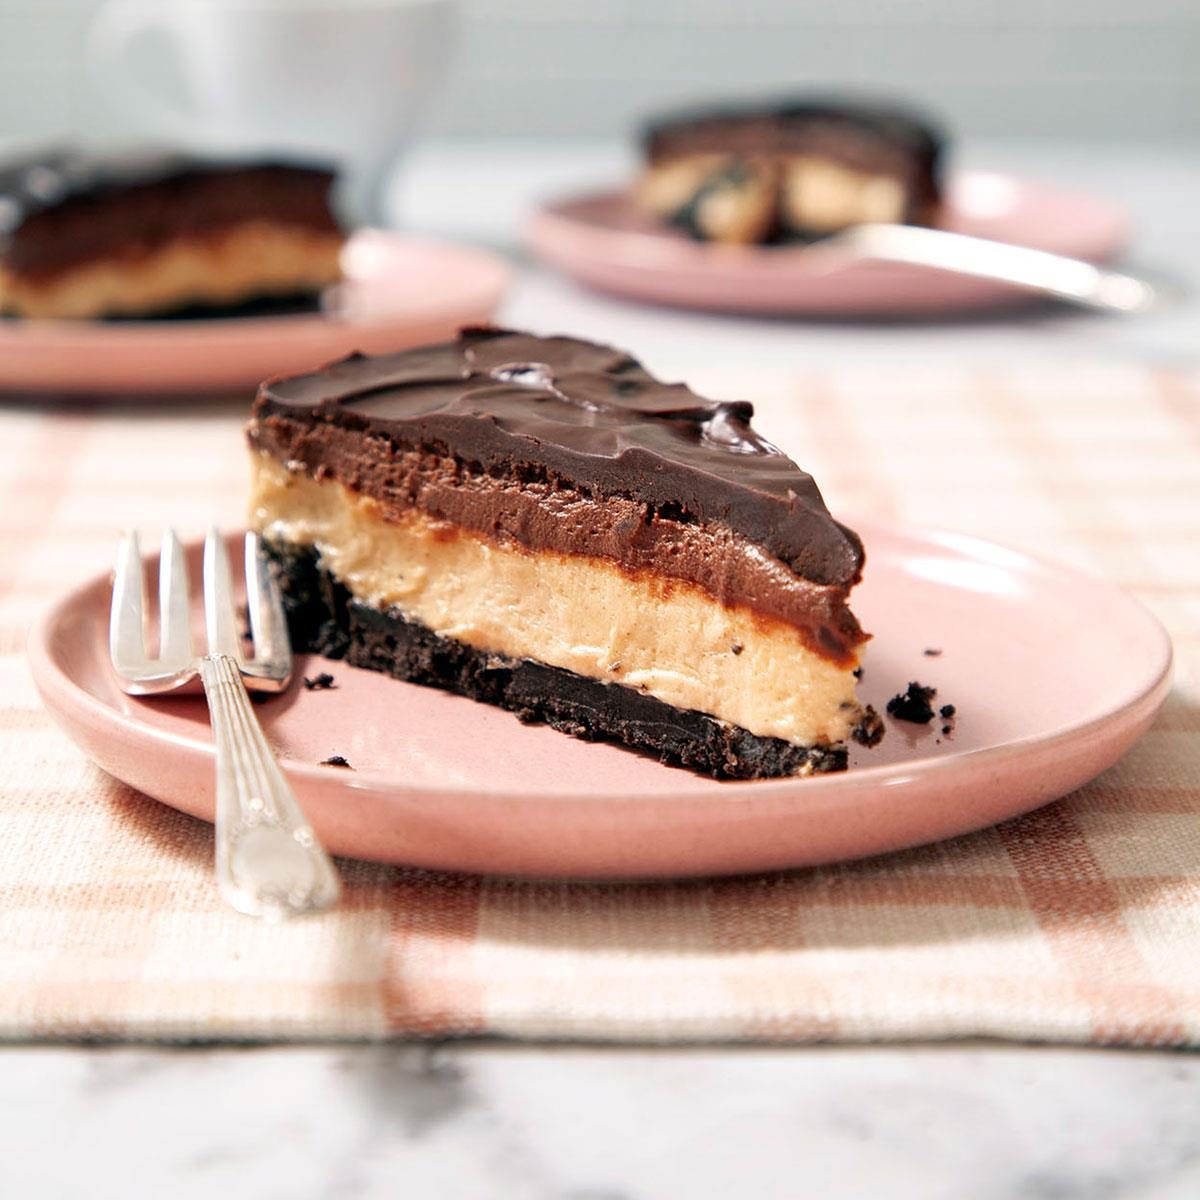 https://www.tasteofhome.com/wp-content/uploads/2018/01/Chocolate-Peanut-Butter-Mousse-Cheesecake_EXPS_FT23_50678_EC_110223_14.jpg?fit=700%2C1024